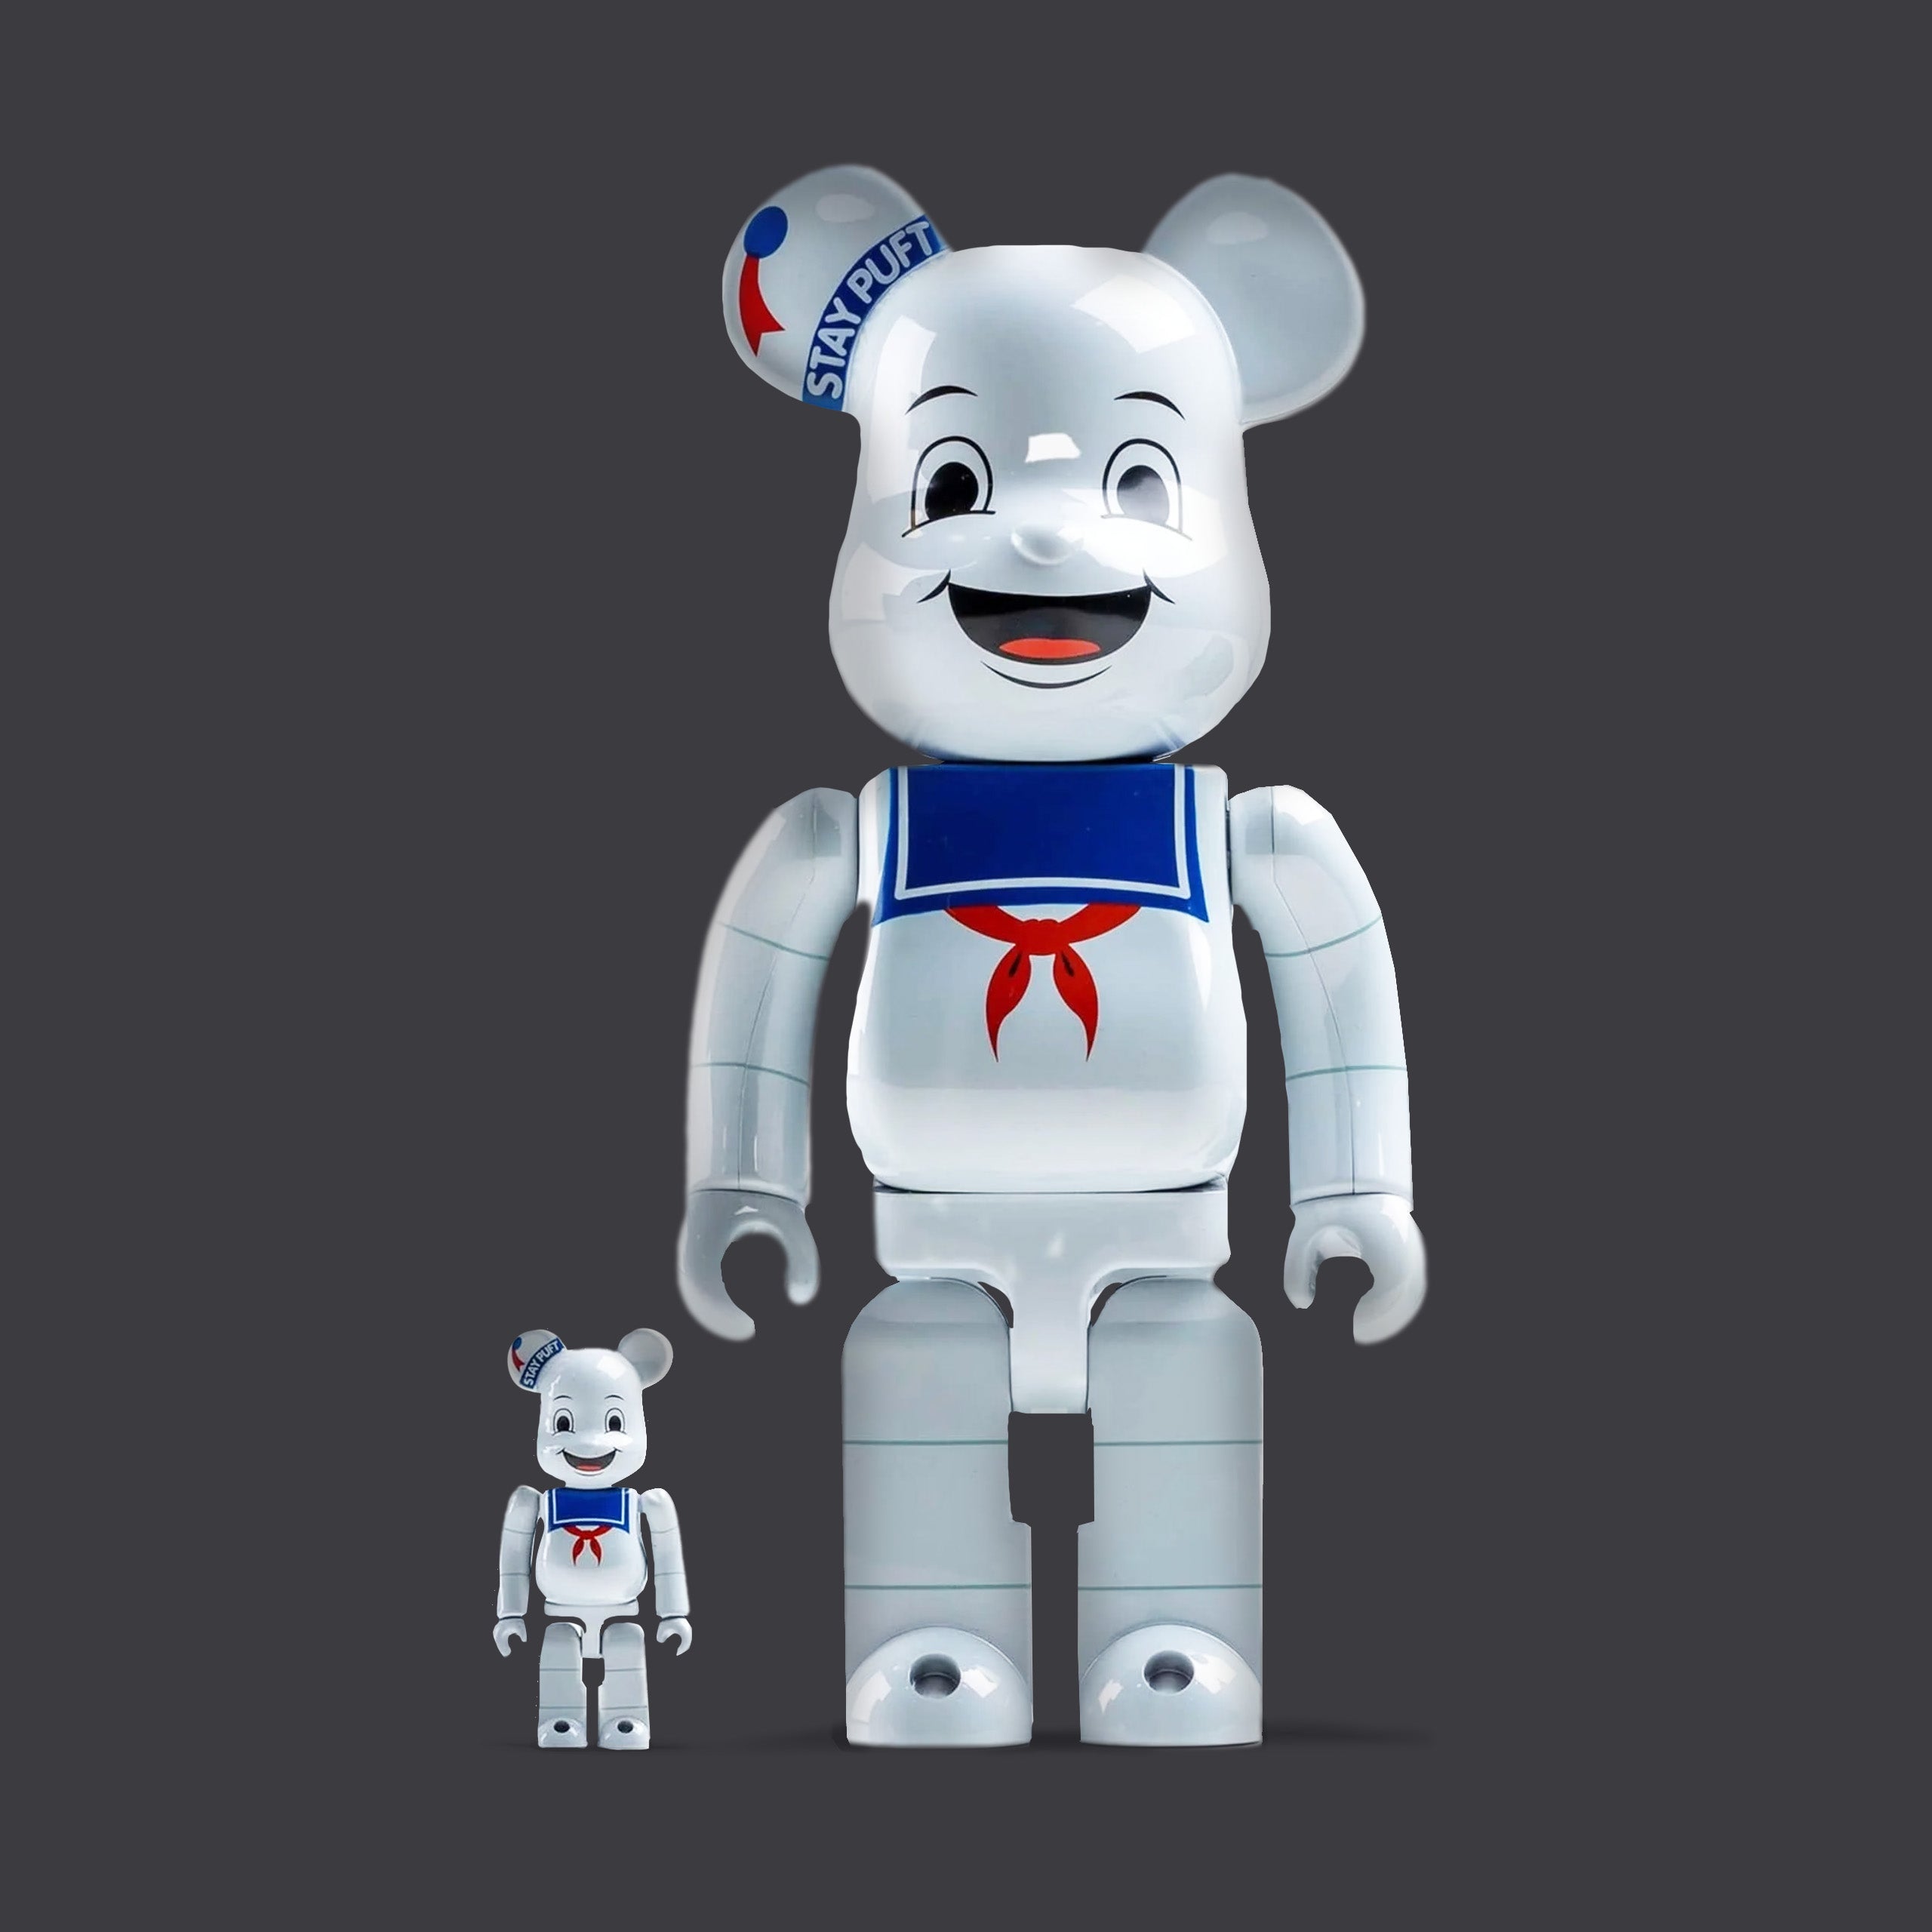 BE@RBRICK STAY PUFT MARSHMALLOW MAN 400％